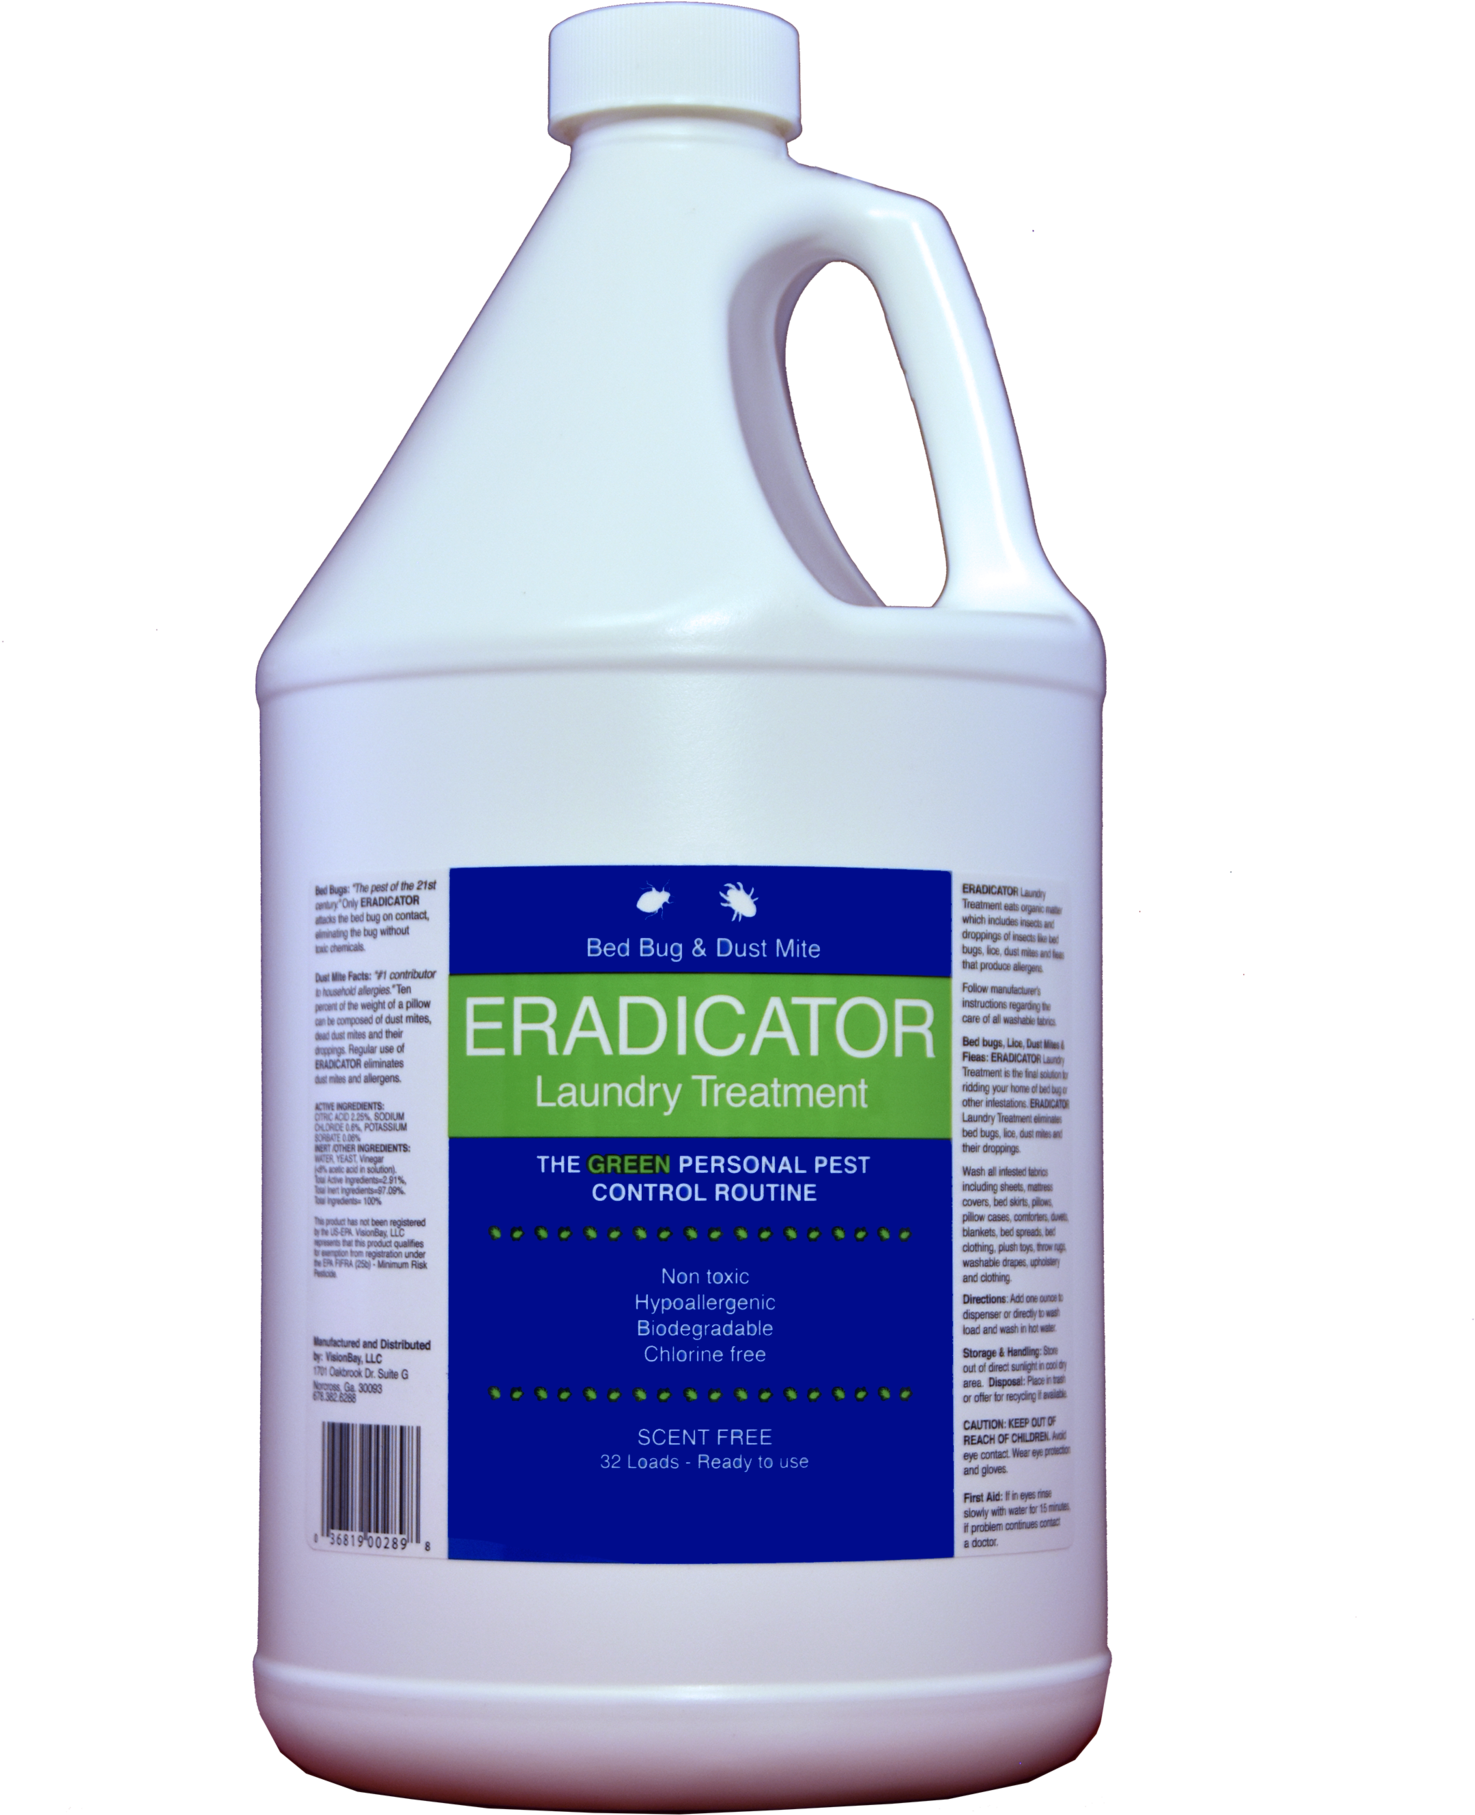 Bed Bug And Dust Mite Eradicator Enzyme Laundry Treatment - House Dust Mite (2048x2048)